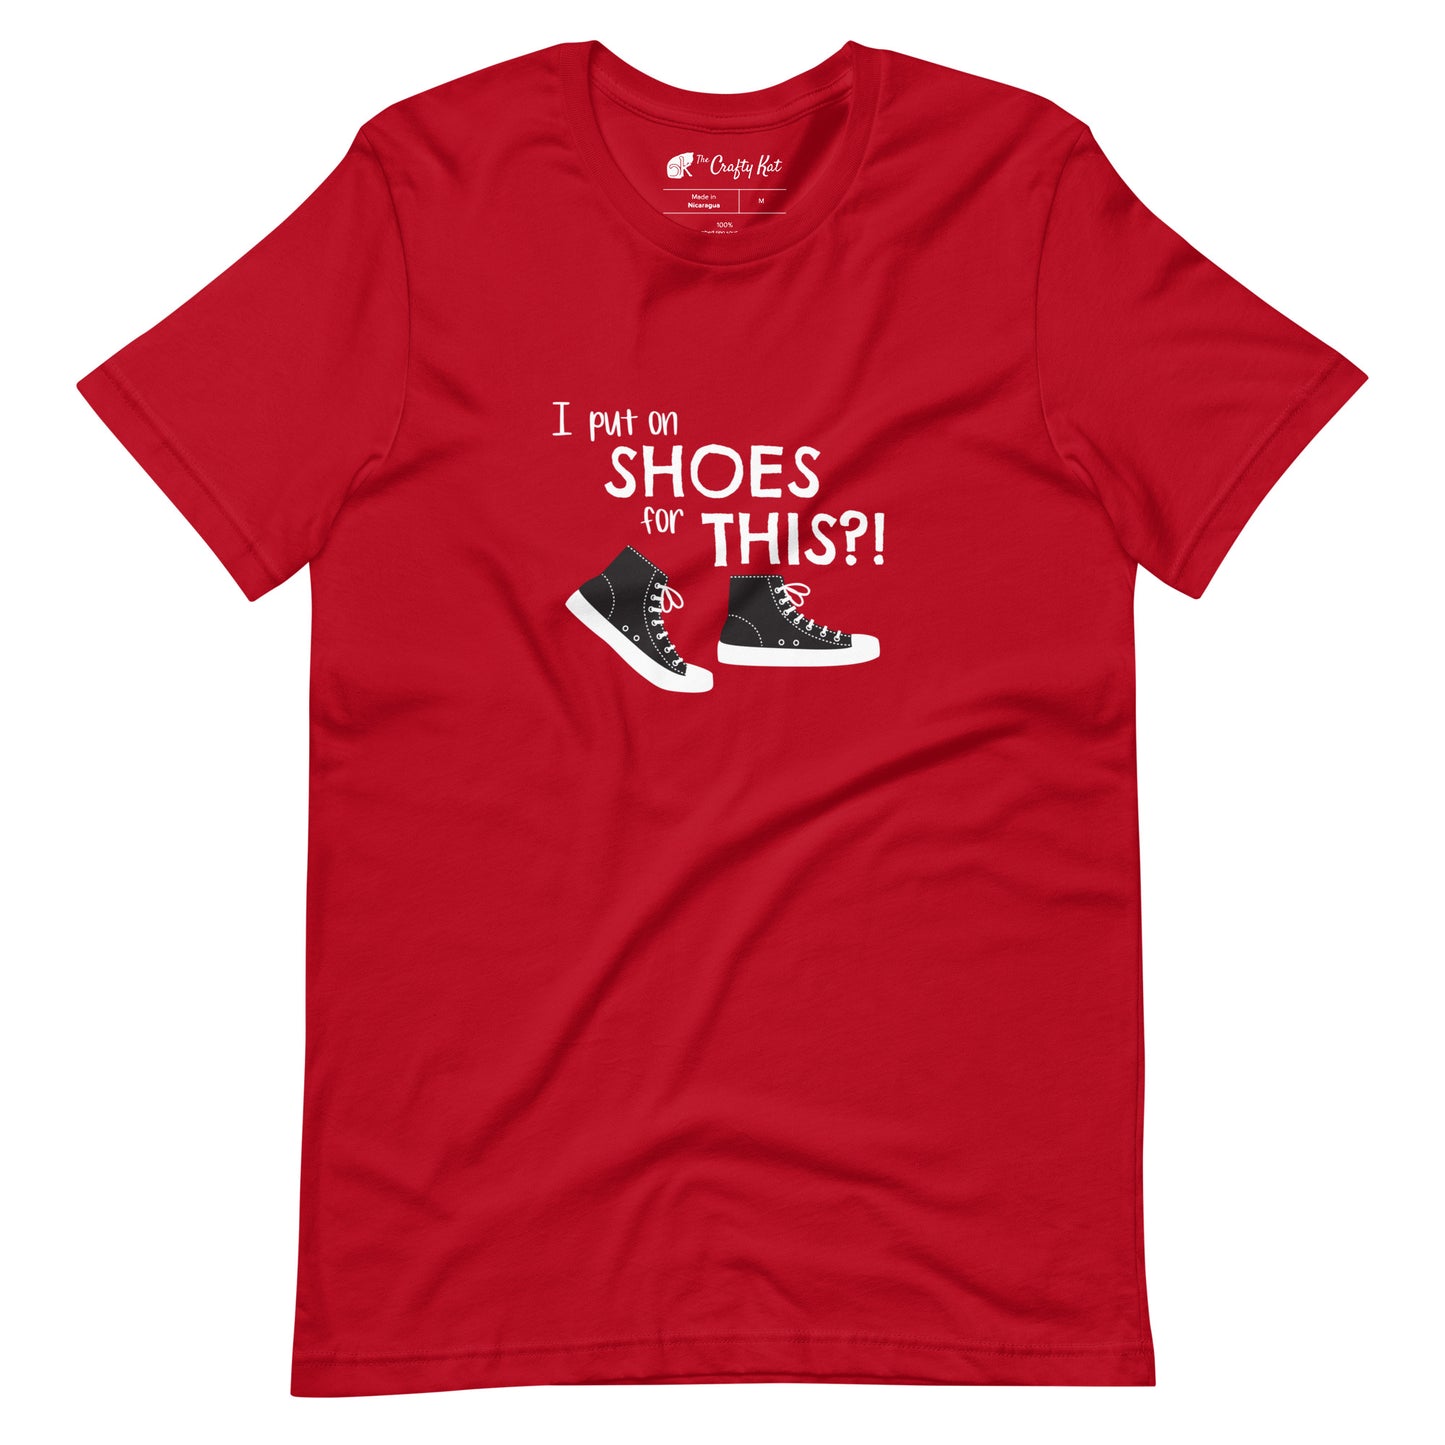 Red t-shirt with graphic of black and white canvas "chuck" sneakers and text: "I put on SHOES for THIS?!"